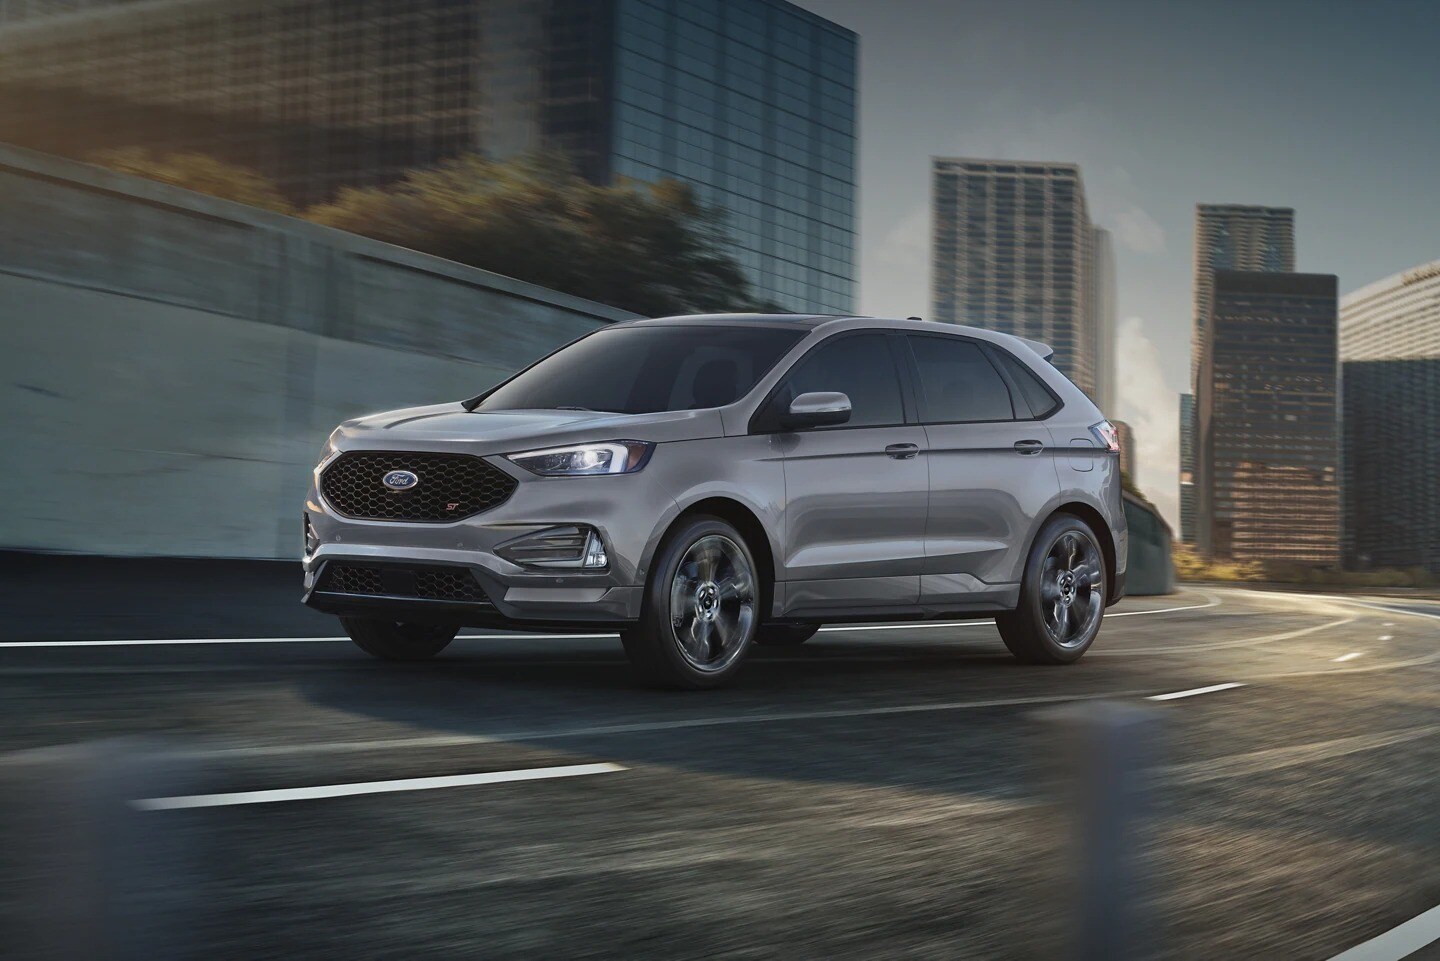 New Ford Edge in gray driving on the highway in the city